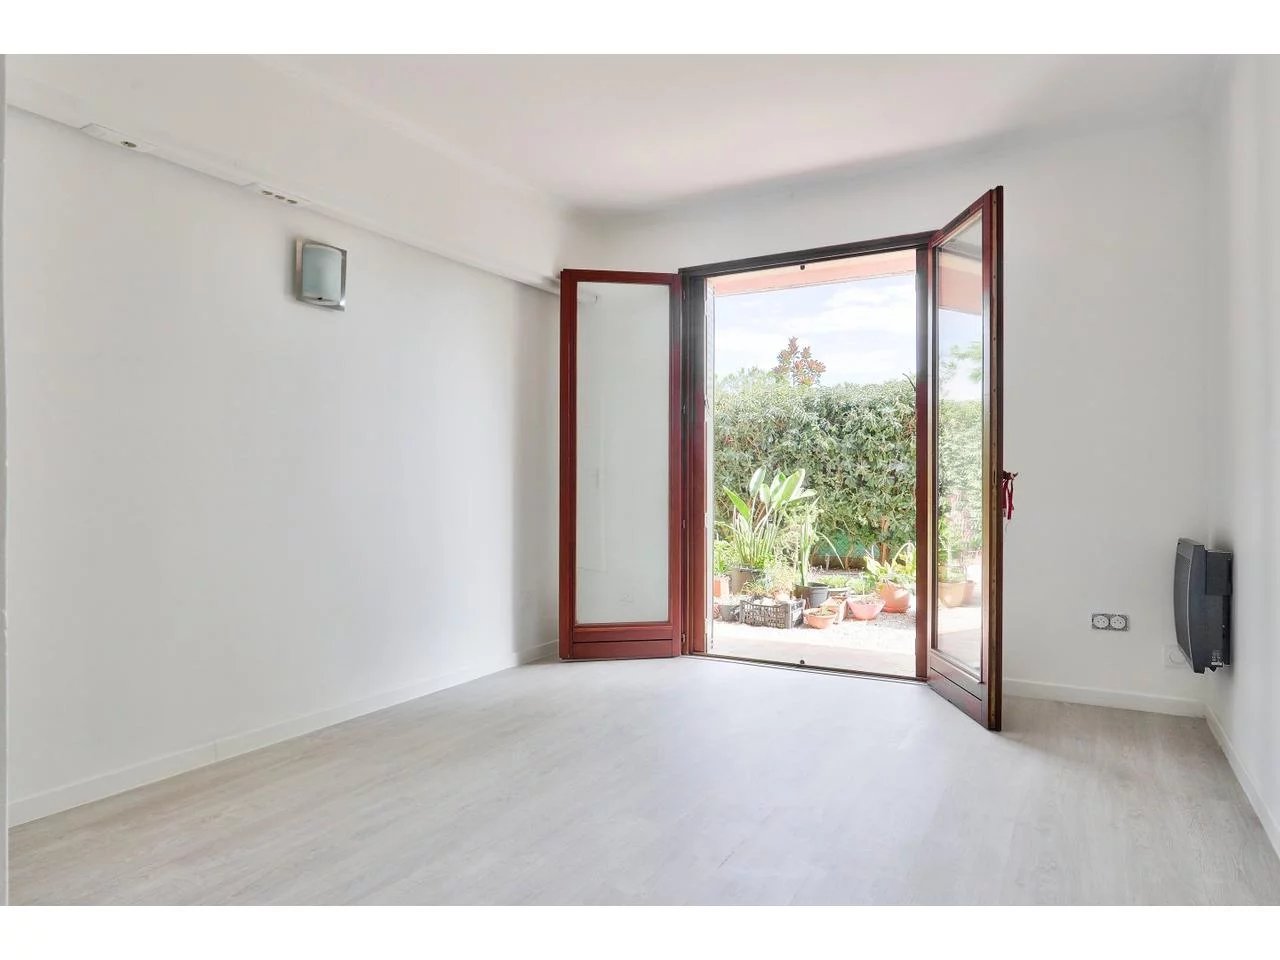 Nice Fabron - Large renovated 90m2 4-room apartment with garden